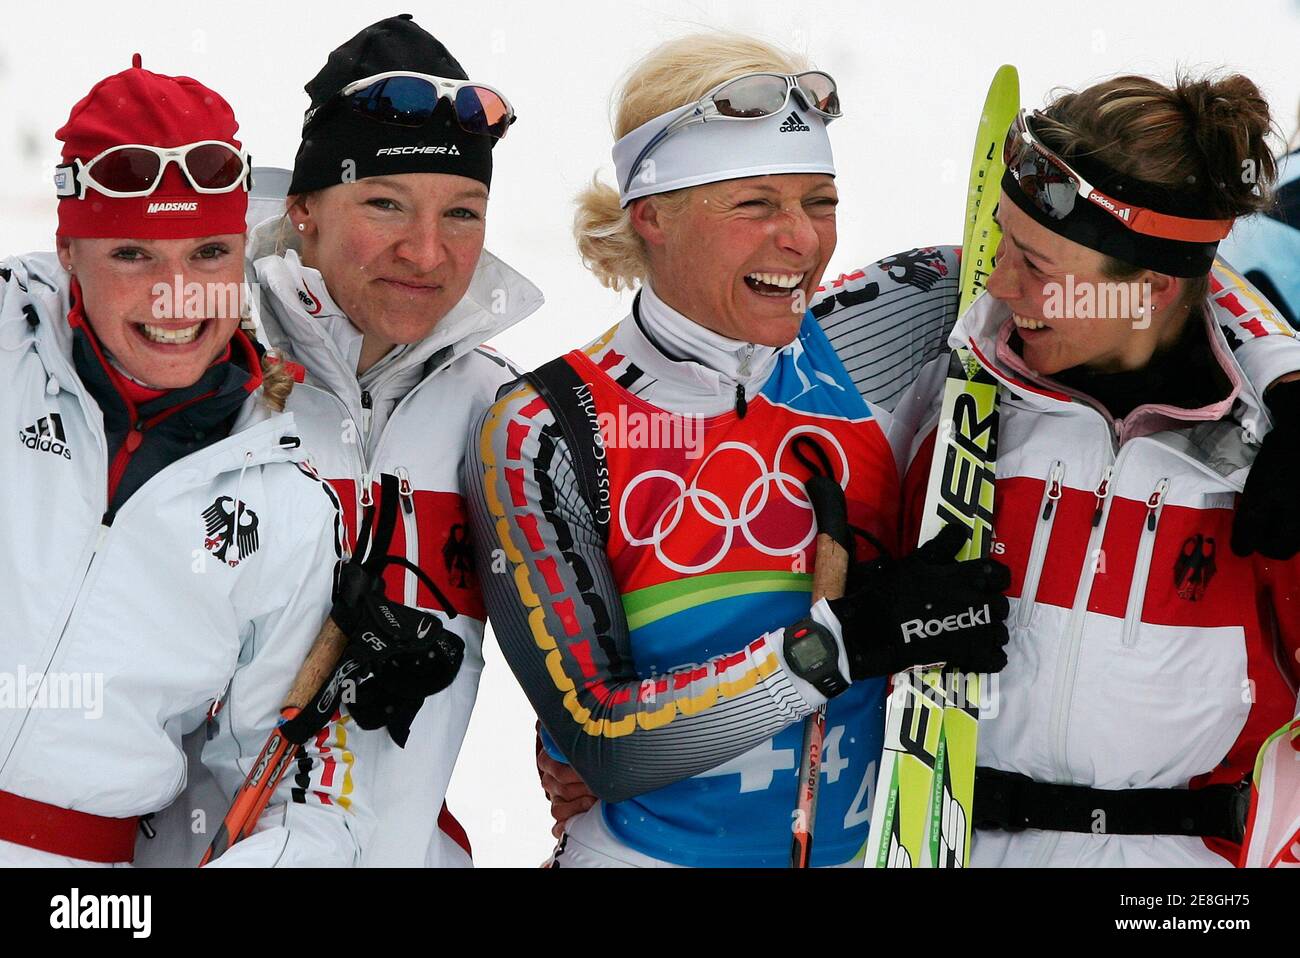 Germany's Evi Sachenbacher-Stehler, Viola Bauer, Claudia Kuenzel and Stefanie Boehler (L-R) celebrate winning the silver medal in the women's 4x5km relay cross country race at the Torino 2006 Winter Olympic Games in Pragelato, Italy, February 18, 2006. Russia won ahead of Germany and Italy. REUTERS/Pascal Lauener Stock Photo